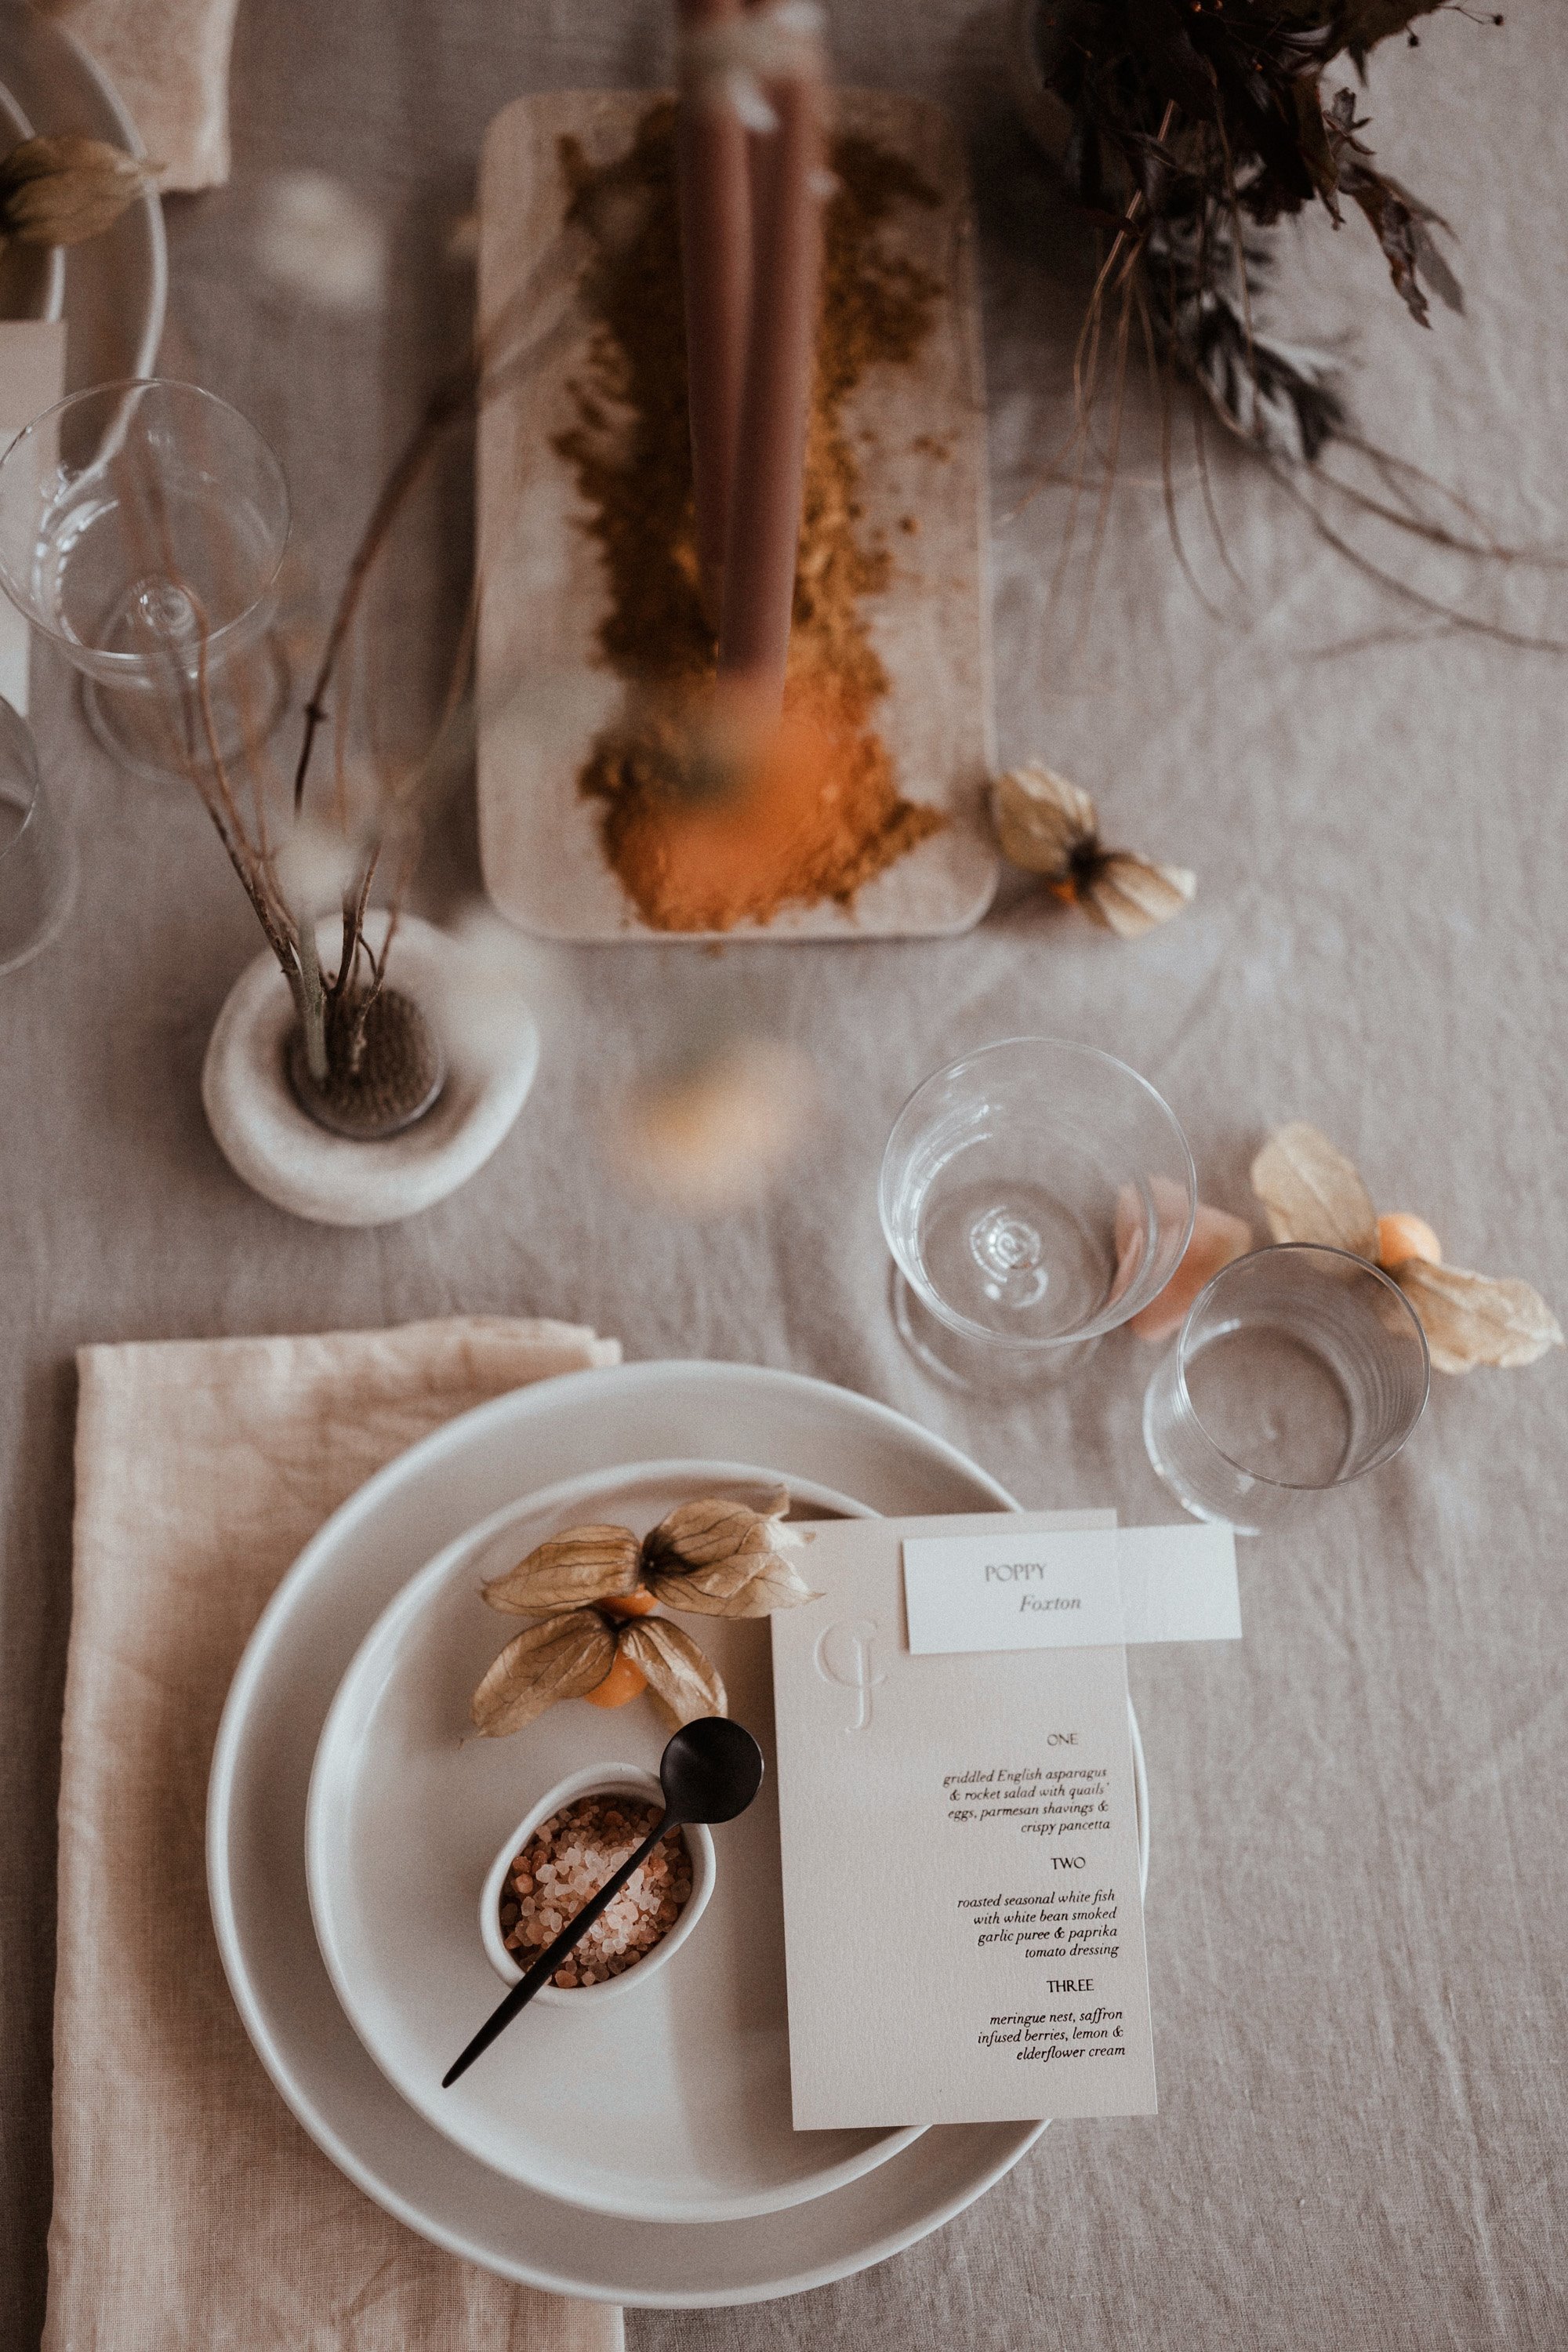 Natural wedding reception styling for a sustainable reception inspired by rewilding at elmore court in gloucestershire